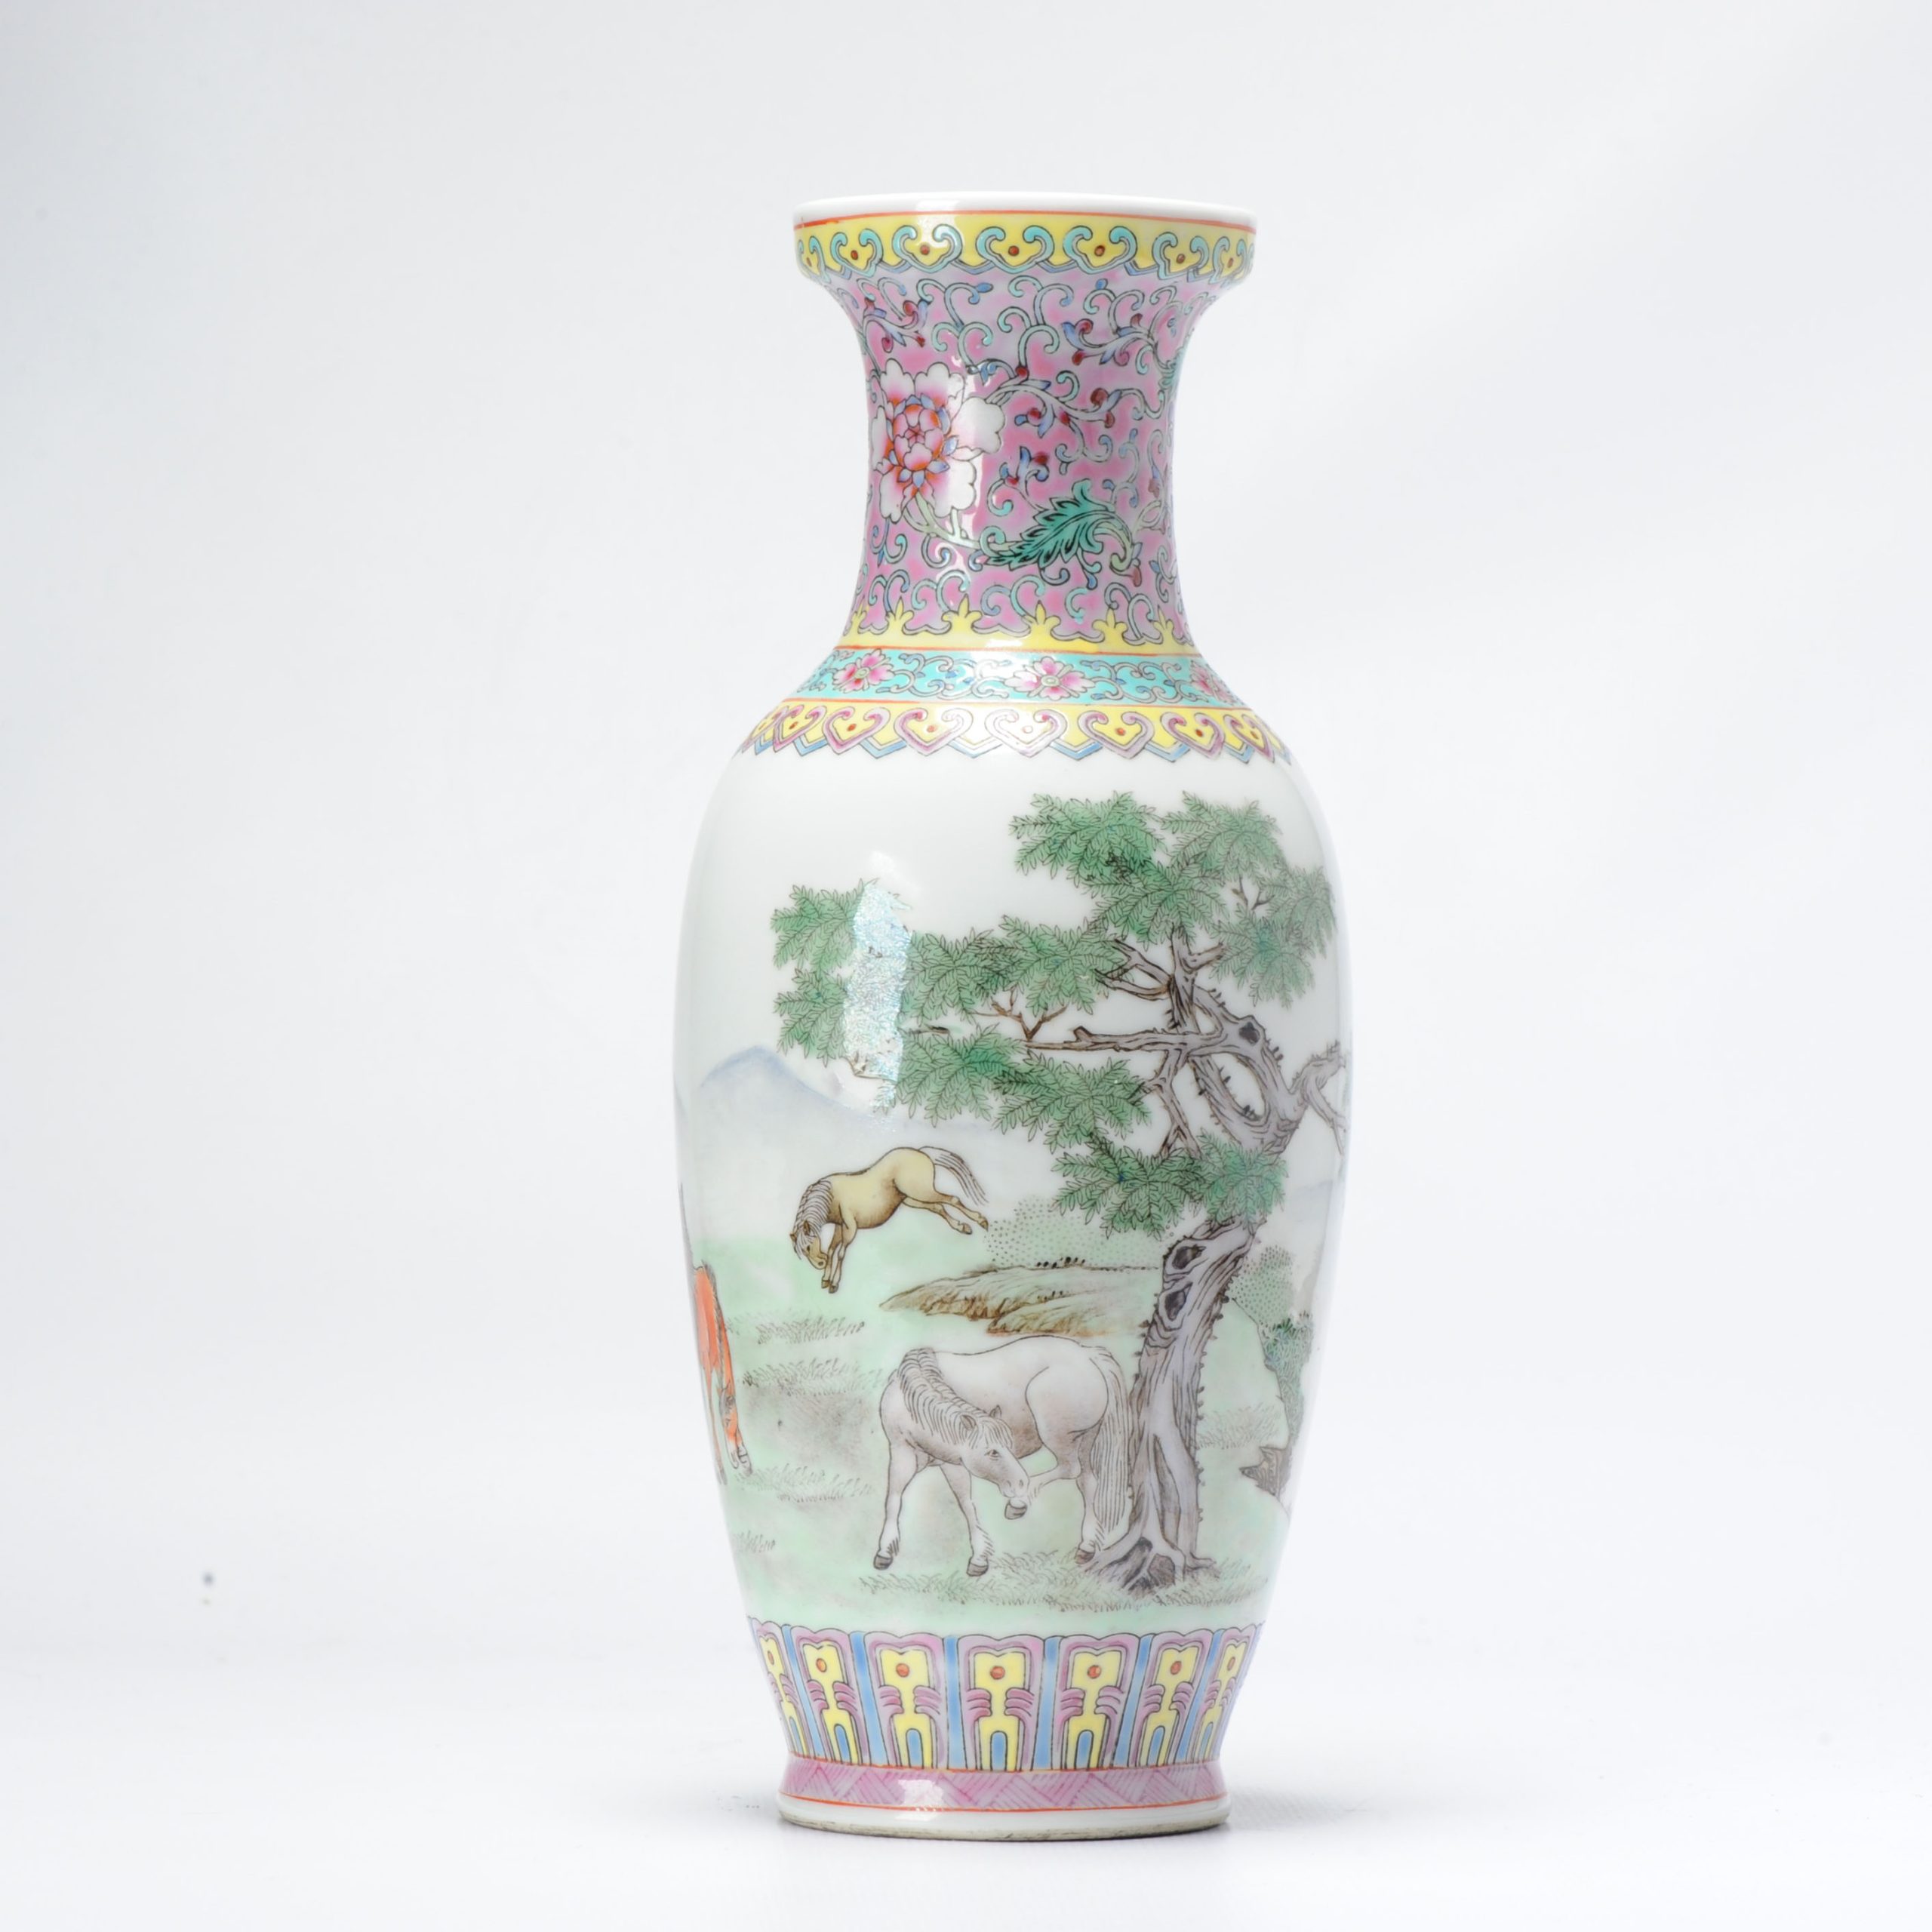 Vintage 1989 or earlier Chinese porcelain PROC Vase with a scene of HORSES China